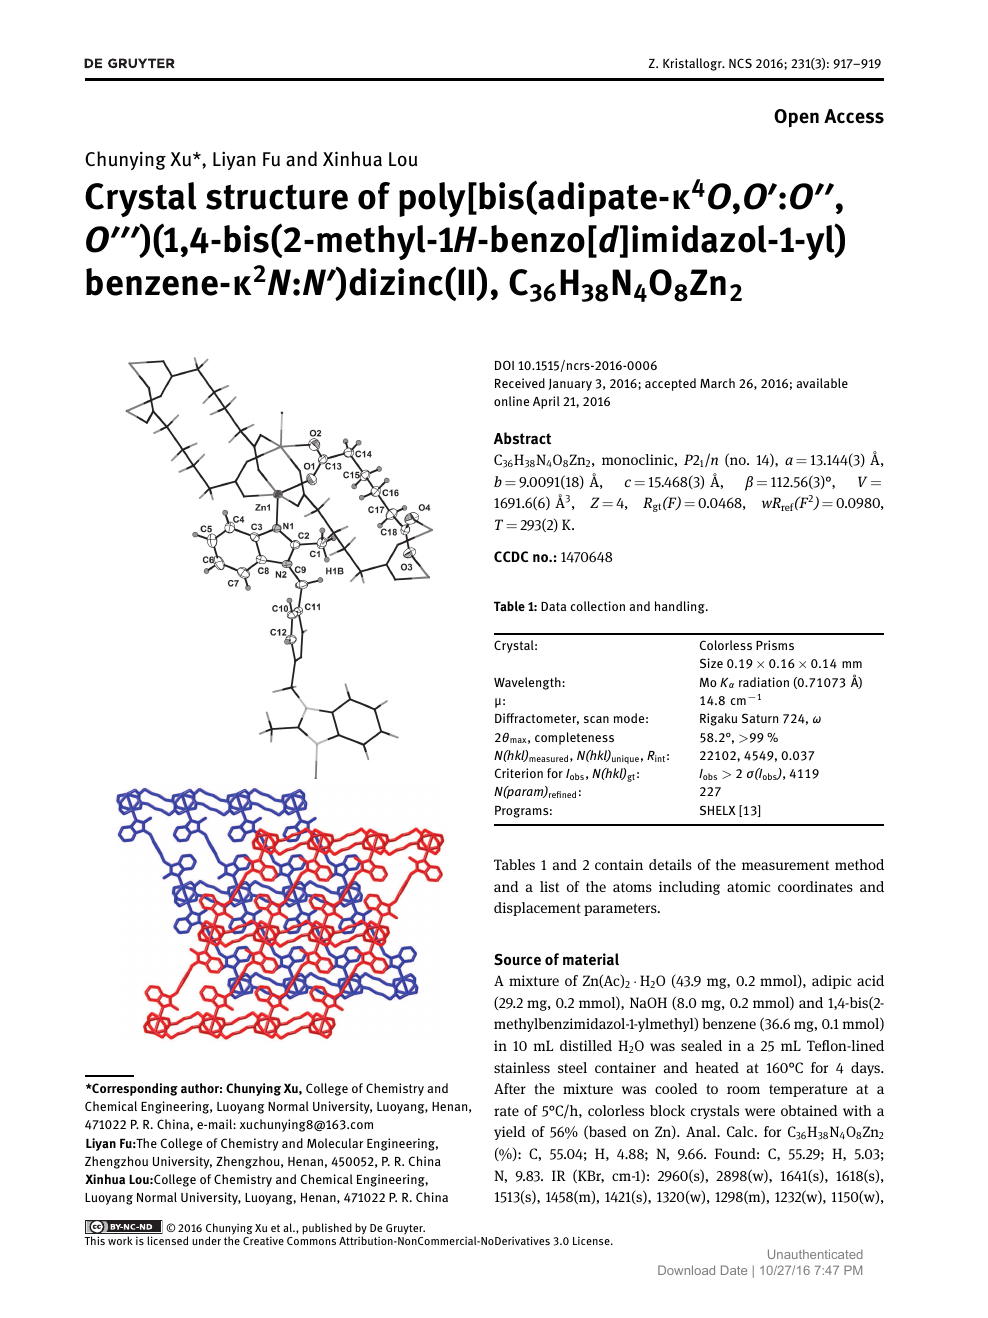 Crystal Structure Of Poly Bis Adipate K4o O O O 1 4 Bis 2 Methyl 1h Benzo D Imidazol 1 Yl Benzene K2n N Dizinc Ii C36h38n4o8zn2 Topic Of Research Paper In Chemical Sciences Download Scholarly Article Pdf And Read For Free On Cyberleninka